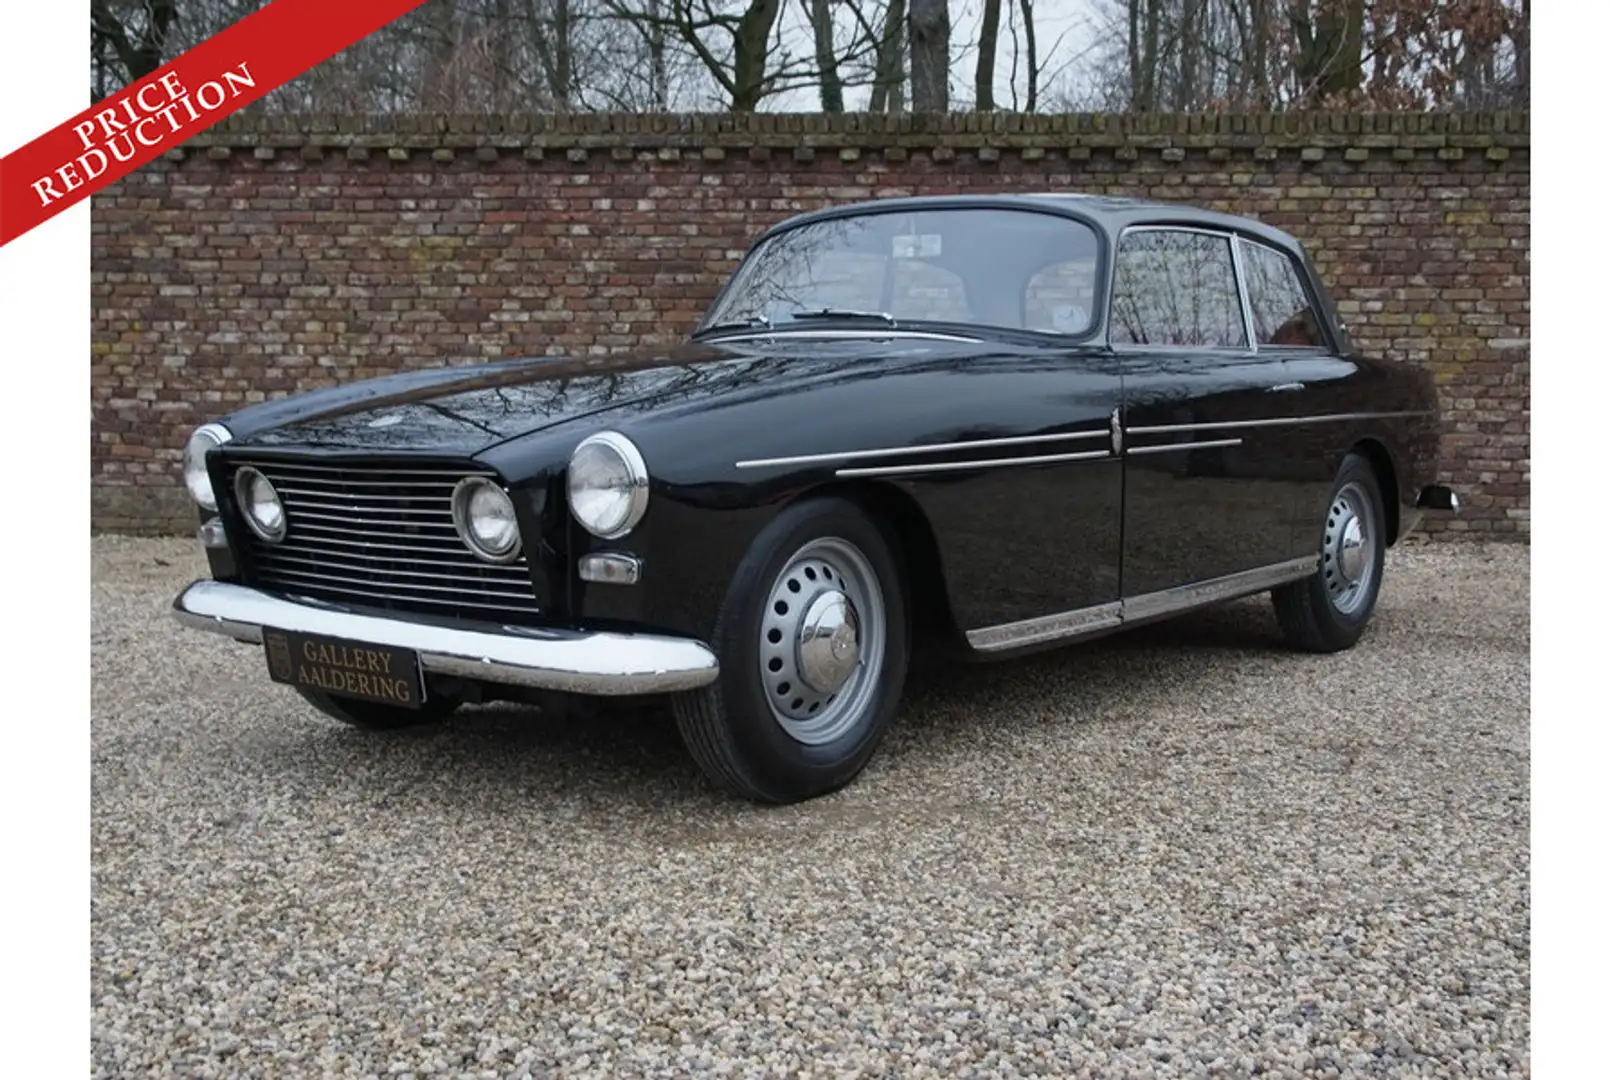 Bristol 408 Saloon PRICE REDUCTION One of only 83 examples mad Nero - 1